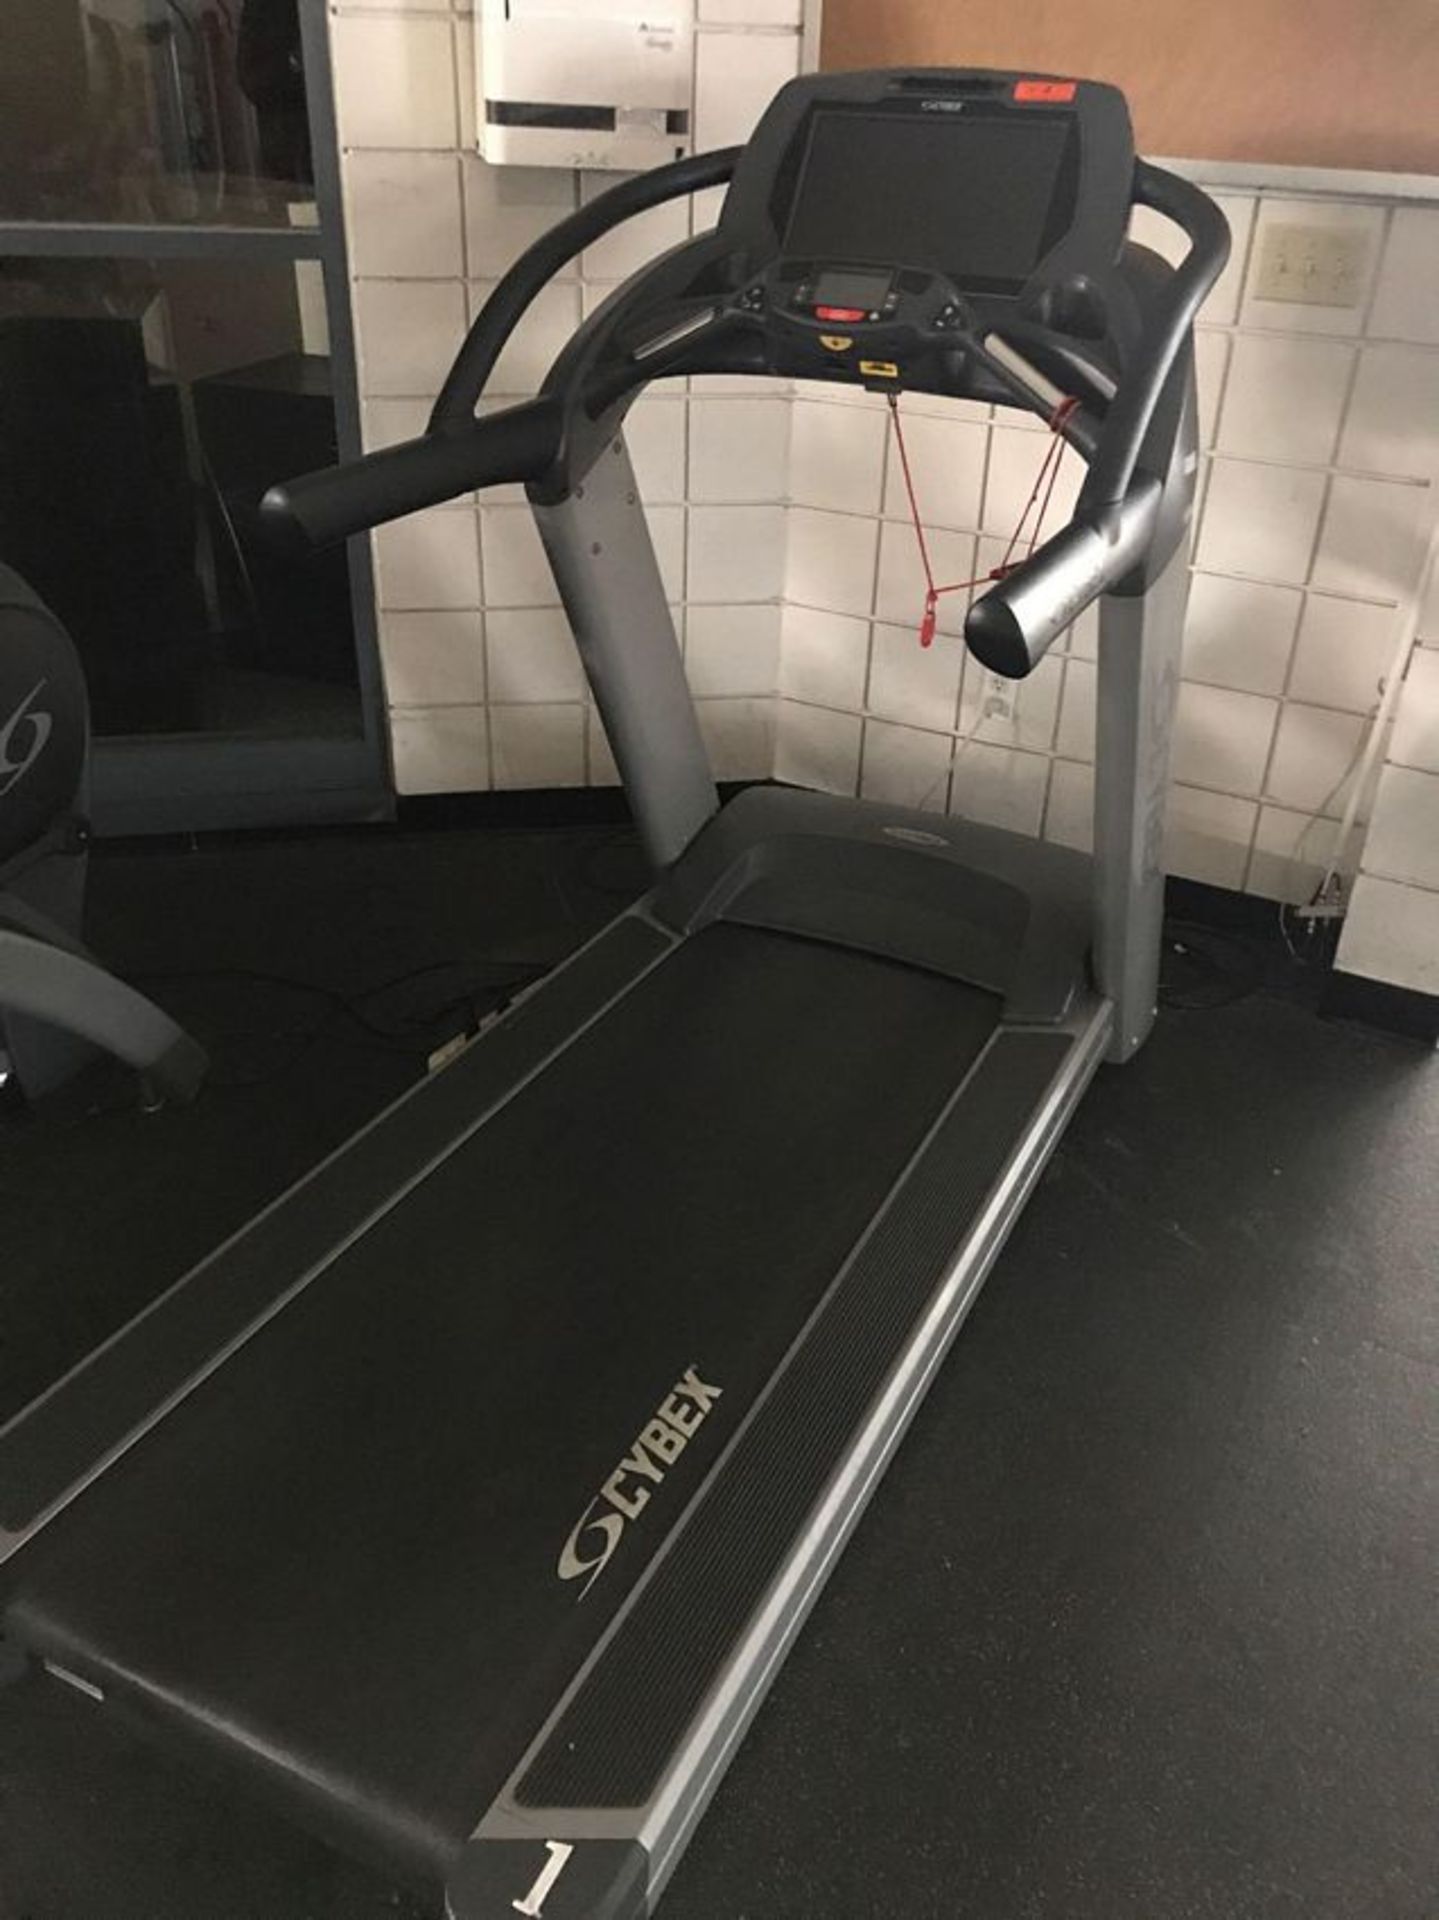 (THIS ITEM NO LONGER FOR INDIVIDUAL SALE) CYBEX 770T TREADMILL